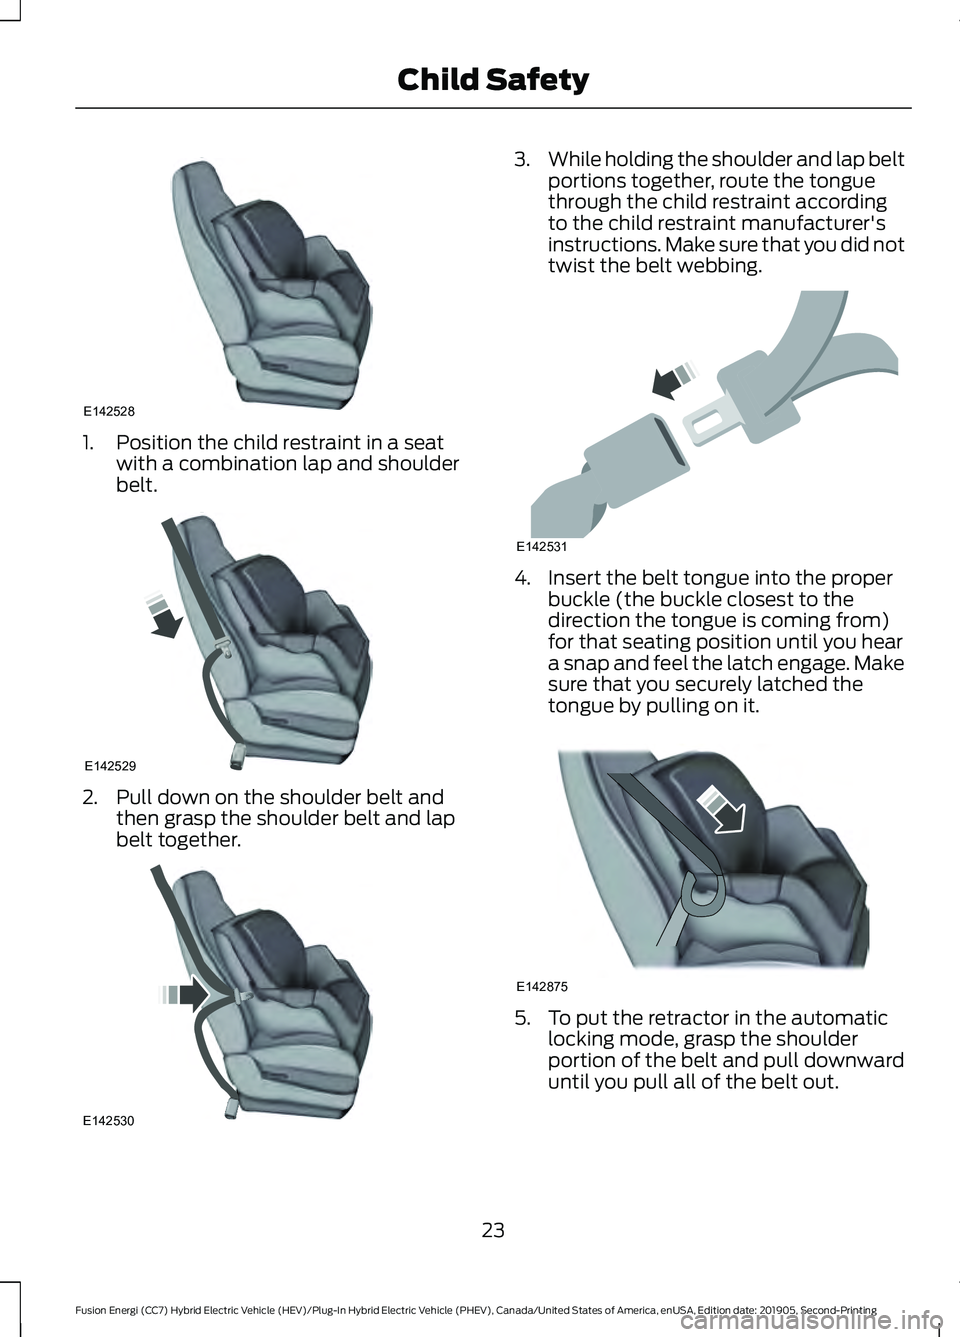 FORD FUSION ENERGI 2020  Owners Manual 1. Position the child restraint in a seat
with a combination lap and shoulder
belt. 2. Pull down on the shoulder belt and
then grasp the shoulder belt and lap
belt together. 3.
While holding the shoul